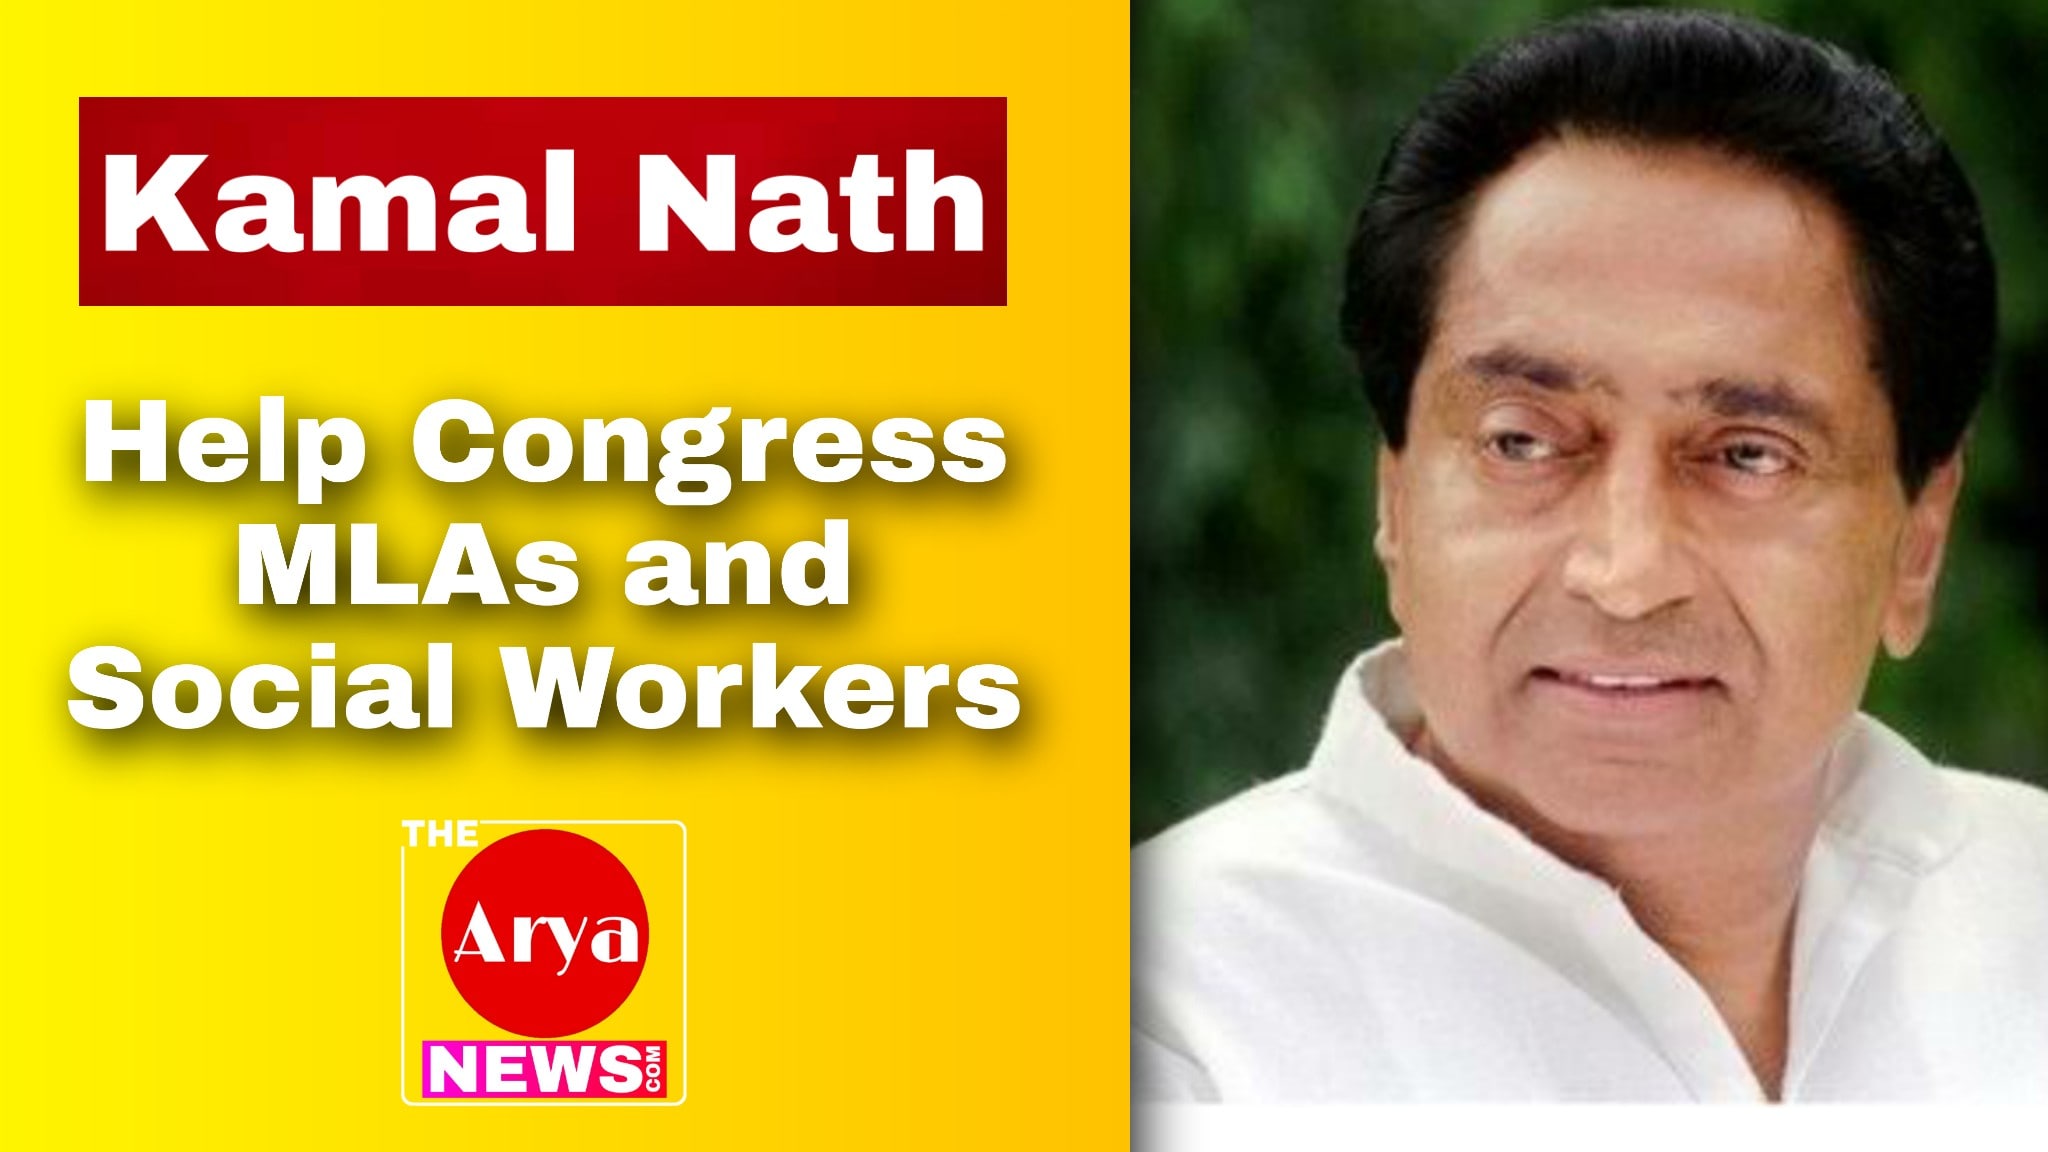 Kamal Nath: Help Congress MLAs and Social Workers